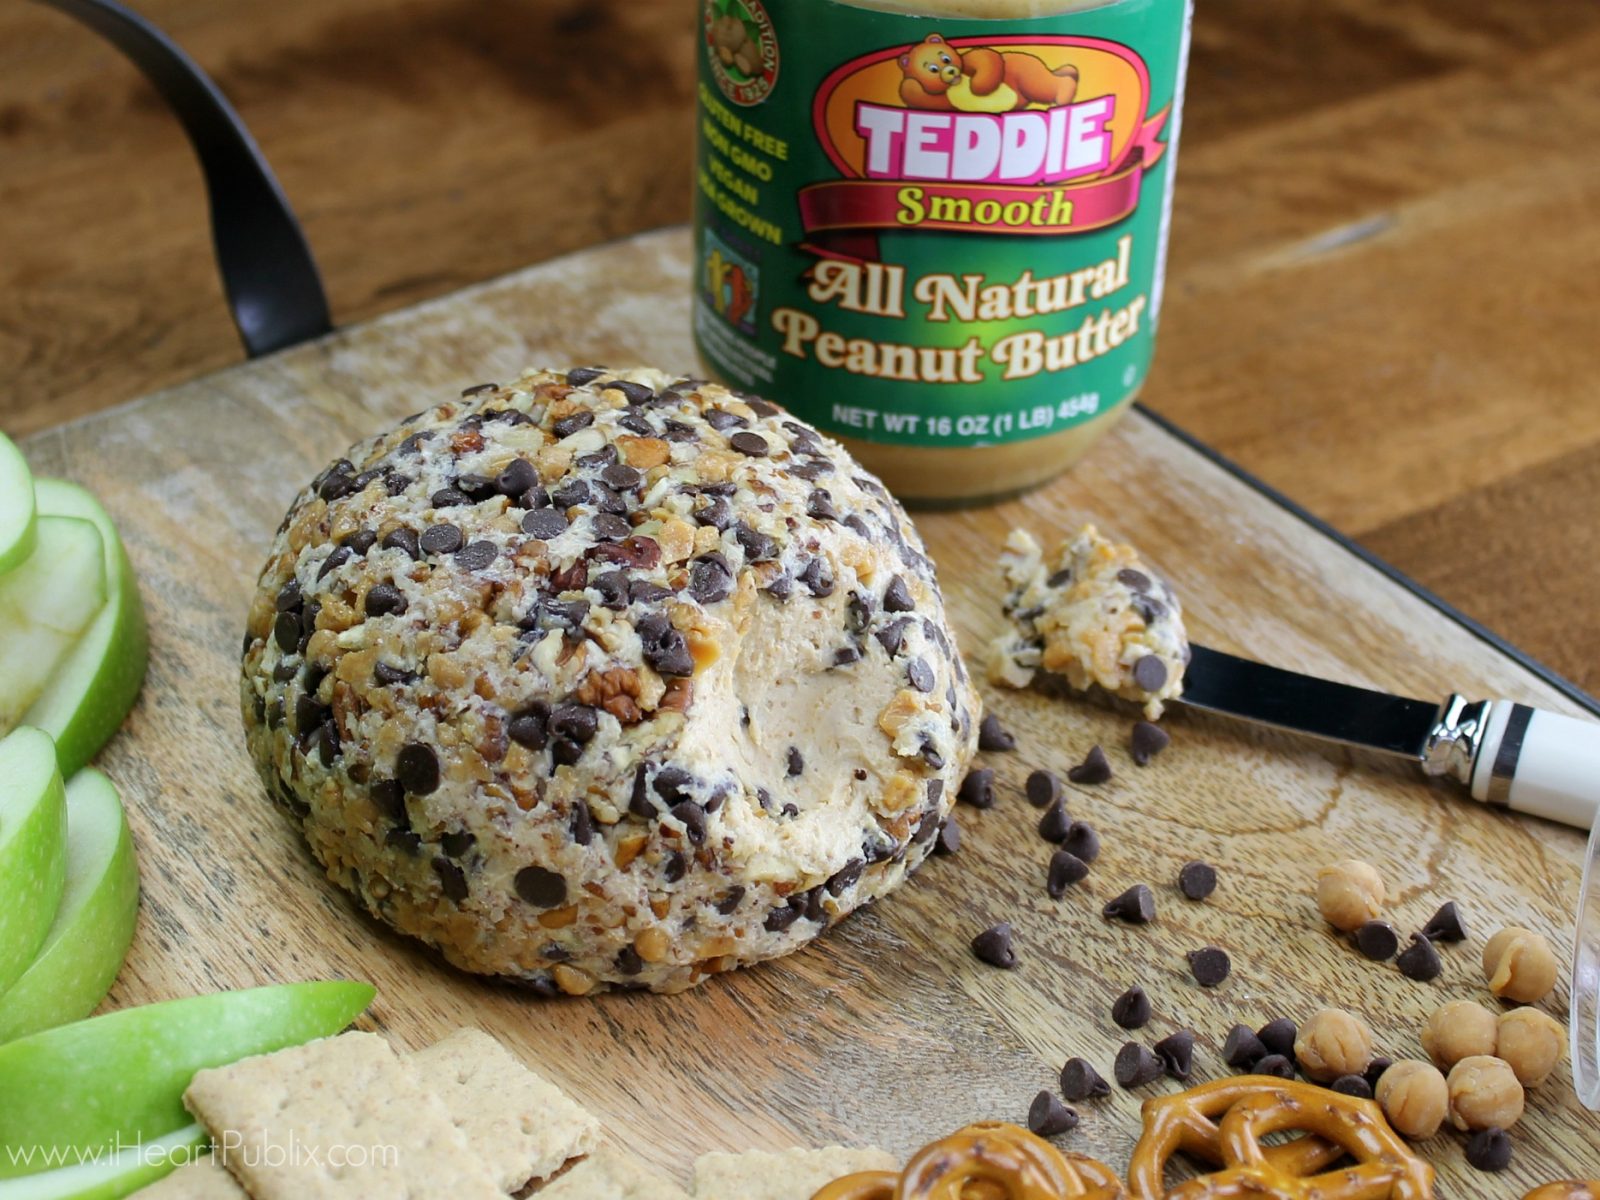 Peanut Butter Turtle Cheese Ball – Easy & Tasty Holiday Treat Made With Teddie All Natural Peanut Butter (Save Now At Publix!)